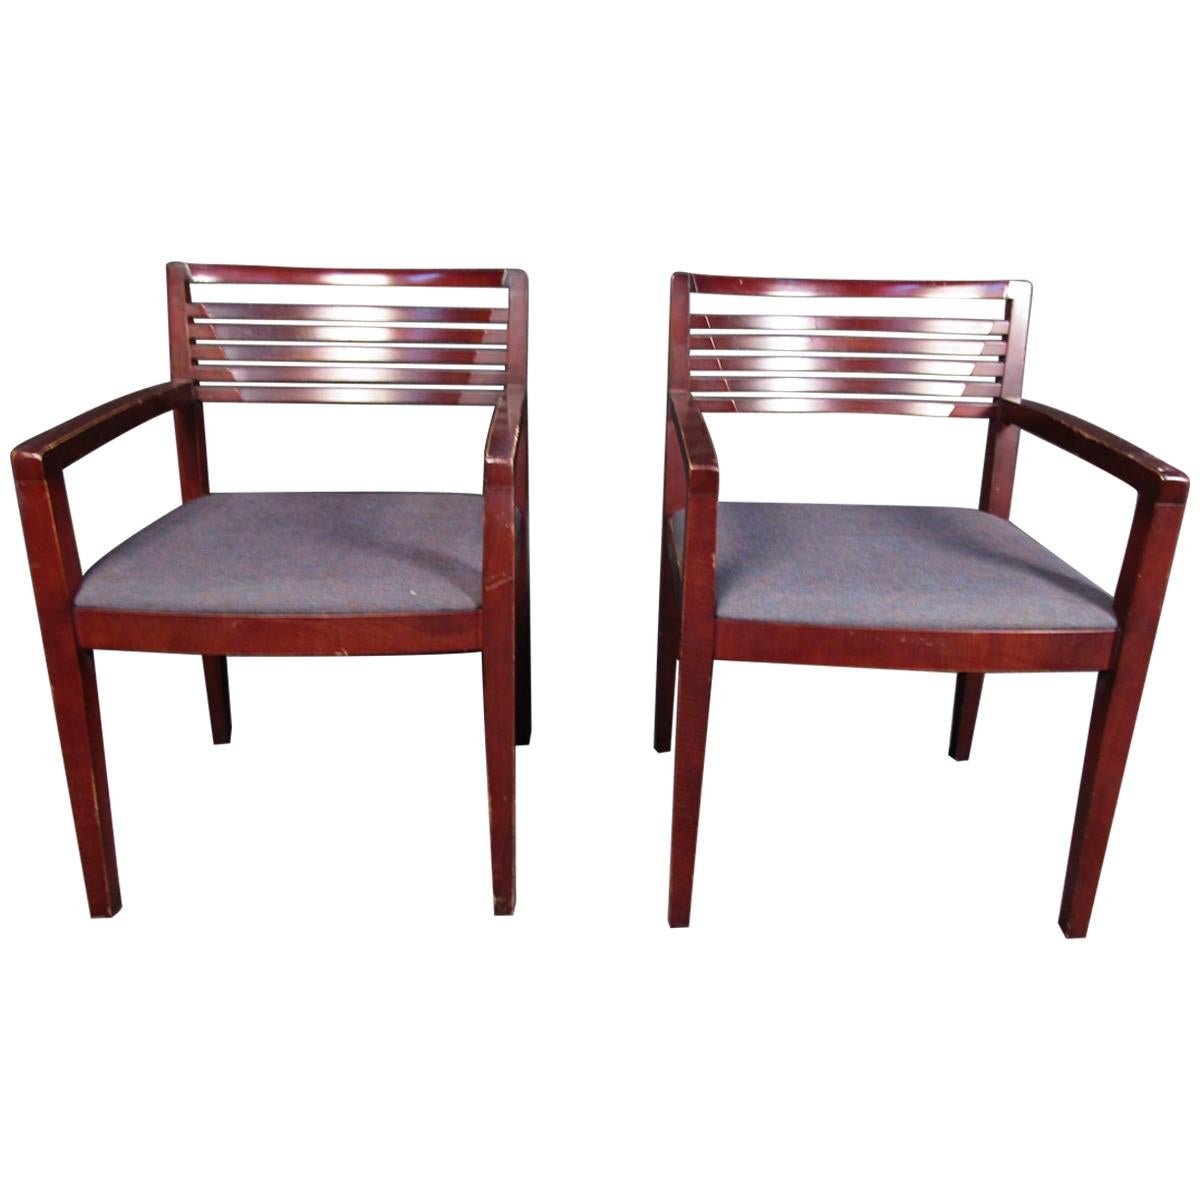 Pair of Vintage Modern Chairs For Sale